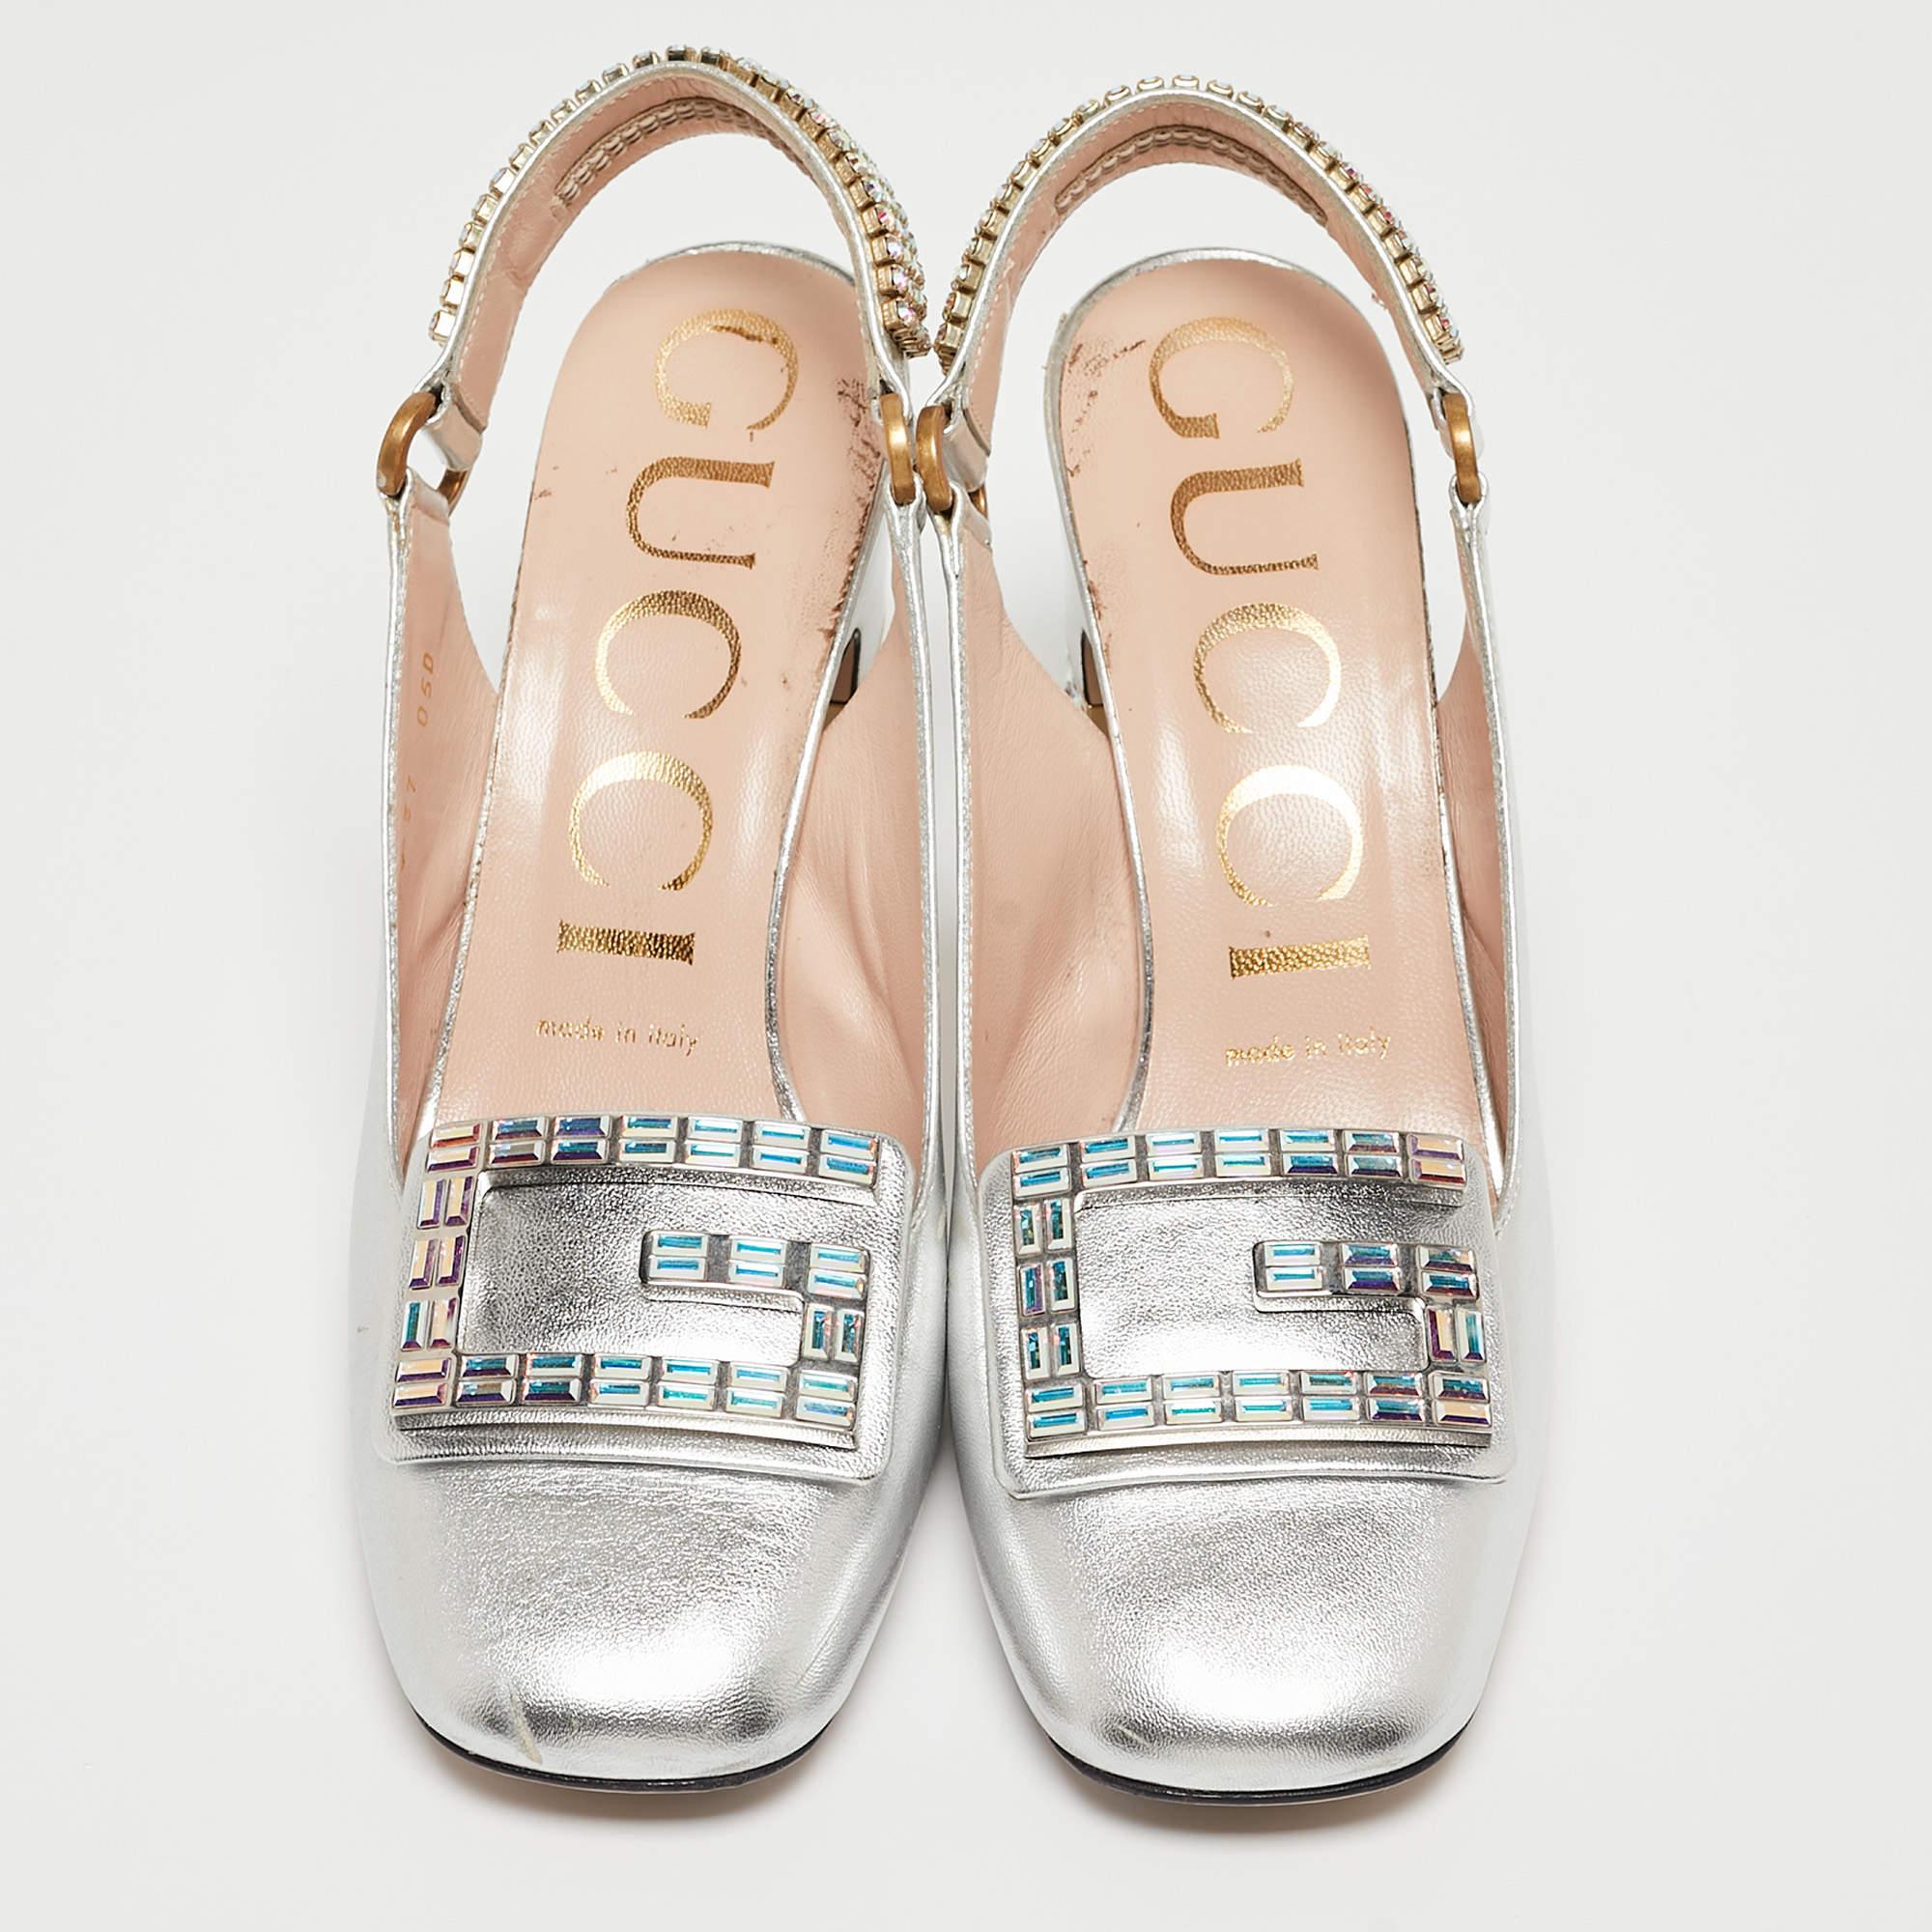 Gucci Silver G Embellished Leather Madelyn Slingback Pumps Size 37 In Fair Condition For Sale In Dubai, Al Qouz 2